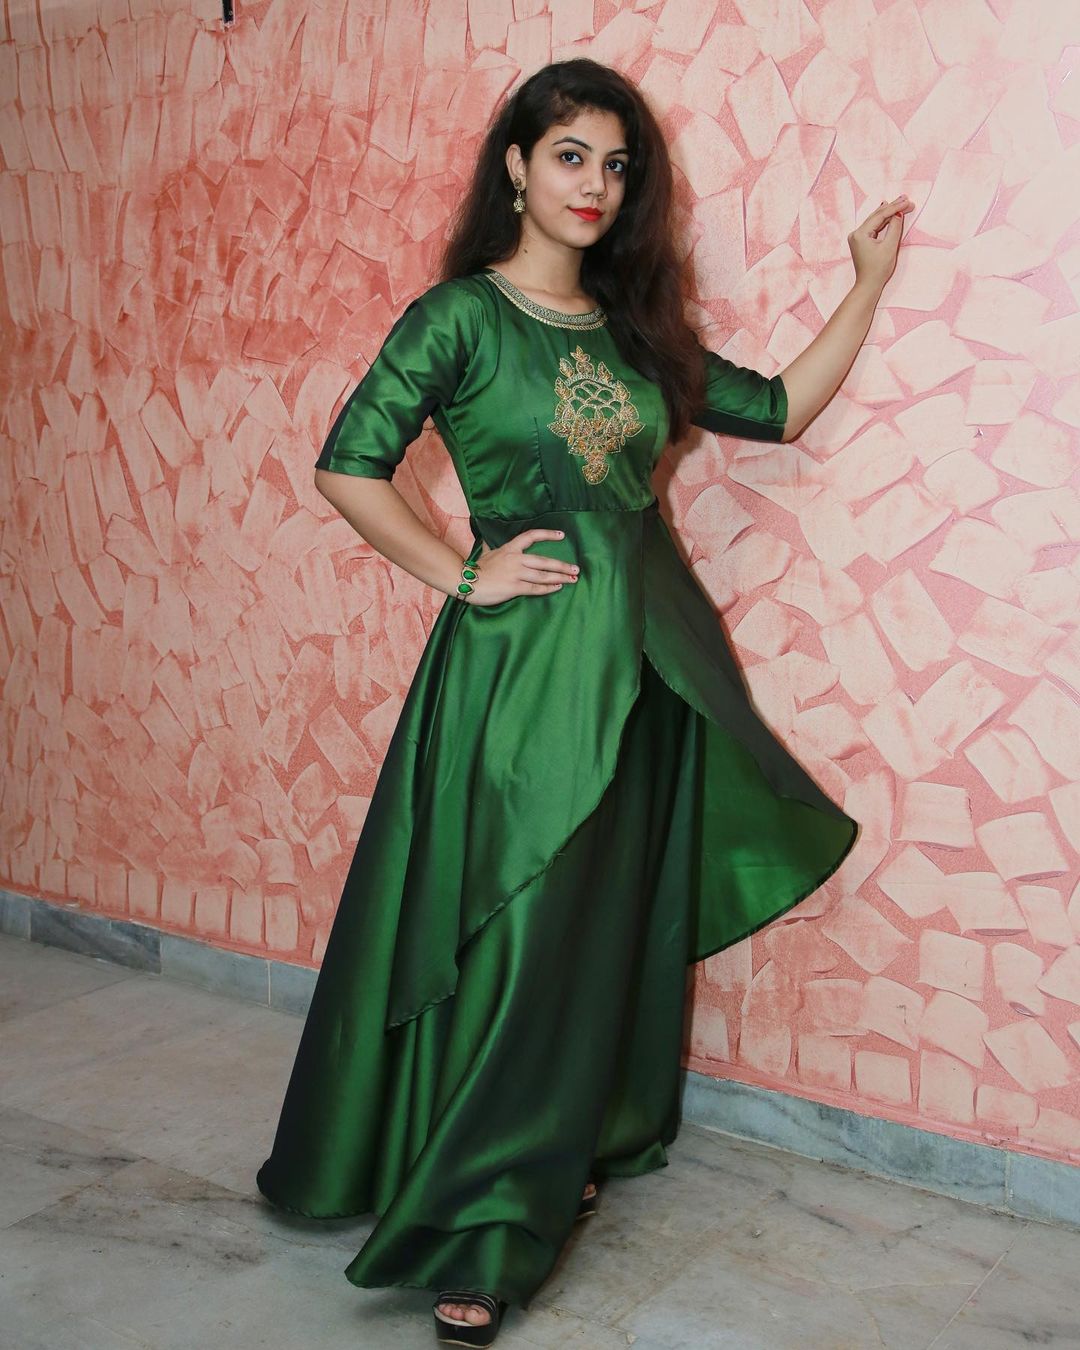 Dhee dancer aqsa khan looks graceful and classy in this images-Aqsa Khan, Aqsakhan Photos,Spicy Hot Pics,Images,High Resolution WallPapers Download